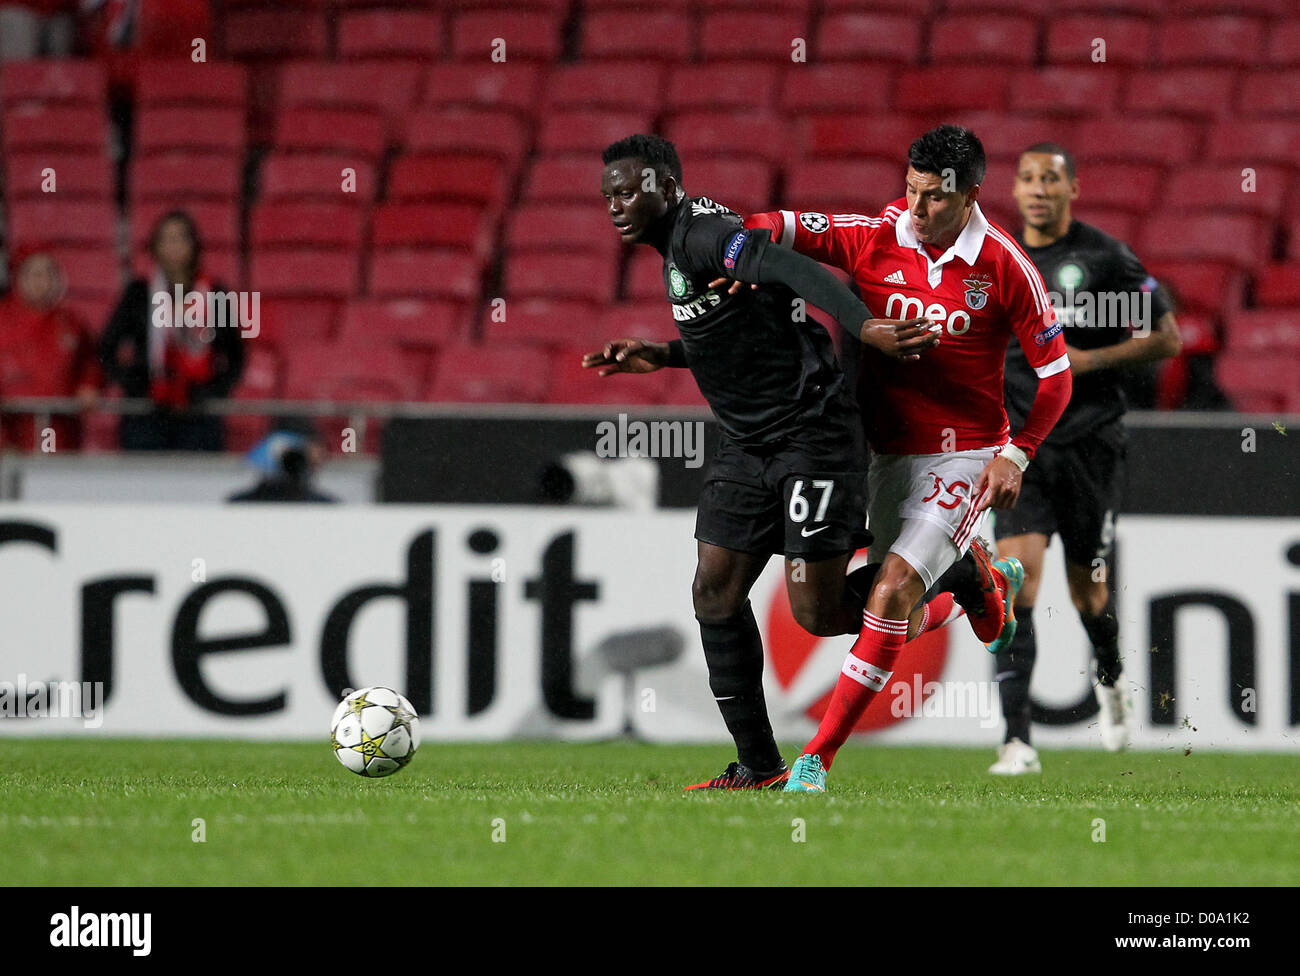 Lisbon, Portugal. 20th November 2012. Celtic'smidfielder Victor Wanyama tries to escape Benfica's midfielder Enzo Perez during the group G UEFA Champions League  football match between Benfica and Celtic at Luz Stadium in Lisbon on November 20, 2012.   Photo / Carlos Rodrigues (Photo credit should read Carlos Rodrigues ). Stock Photo